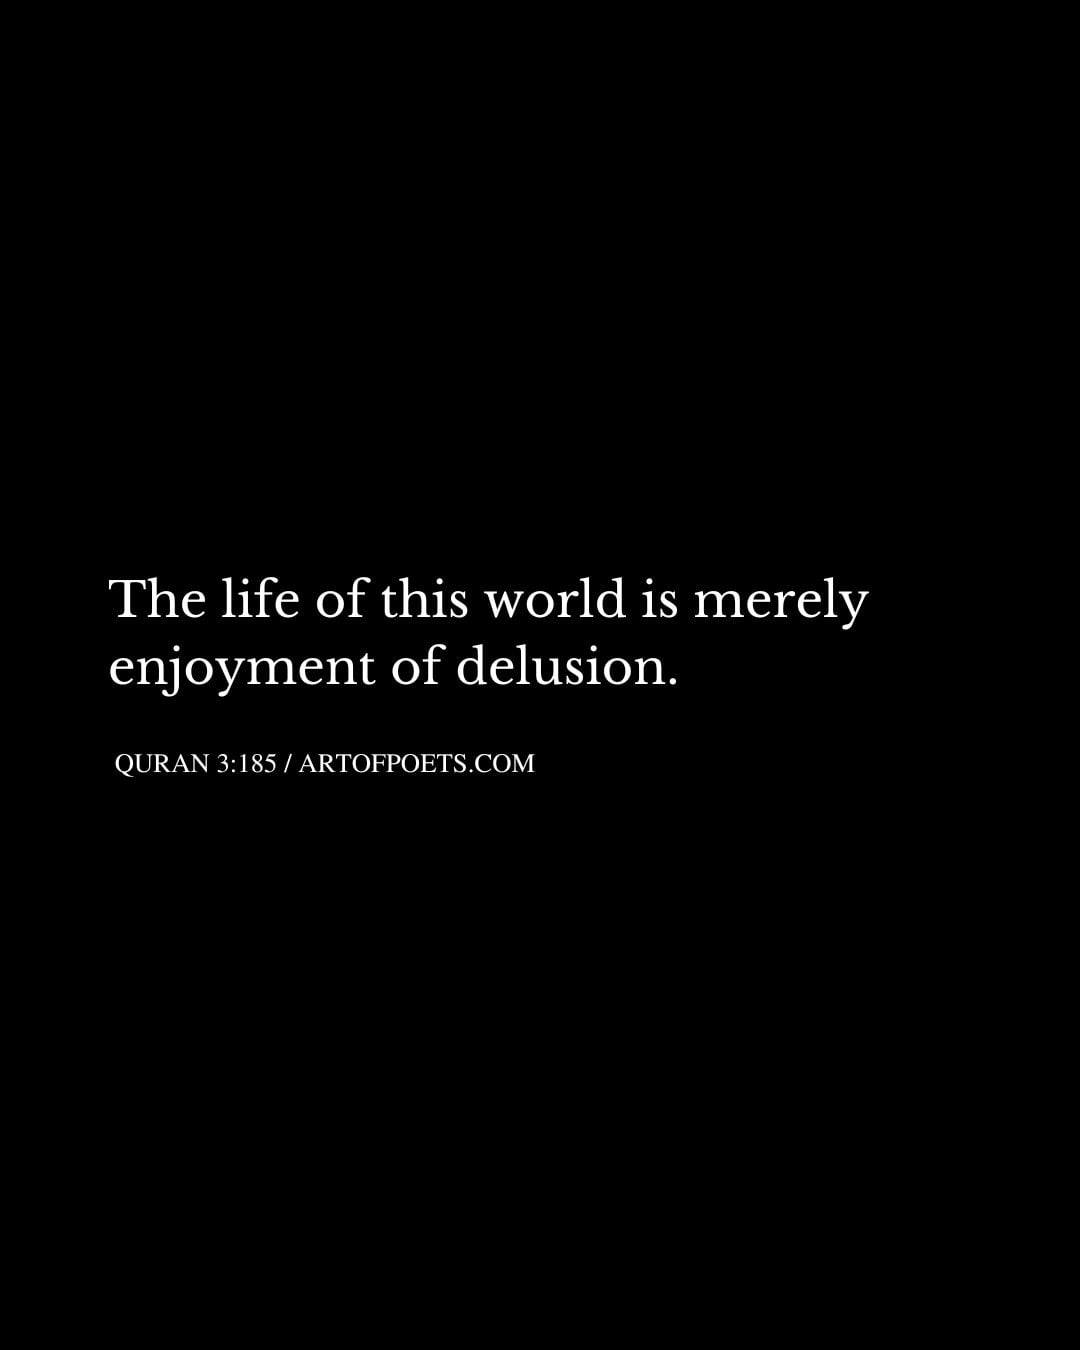 The life of this world is merely enjoyment of delusion